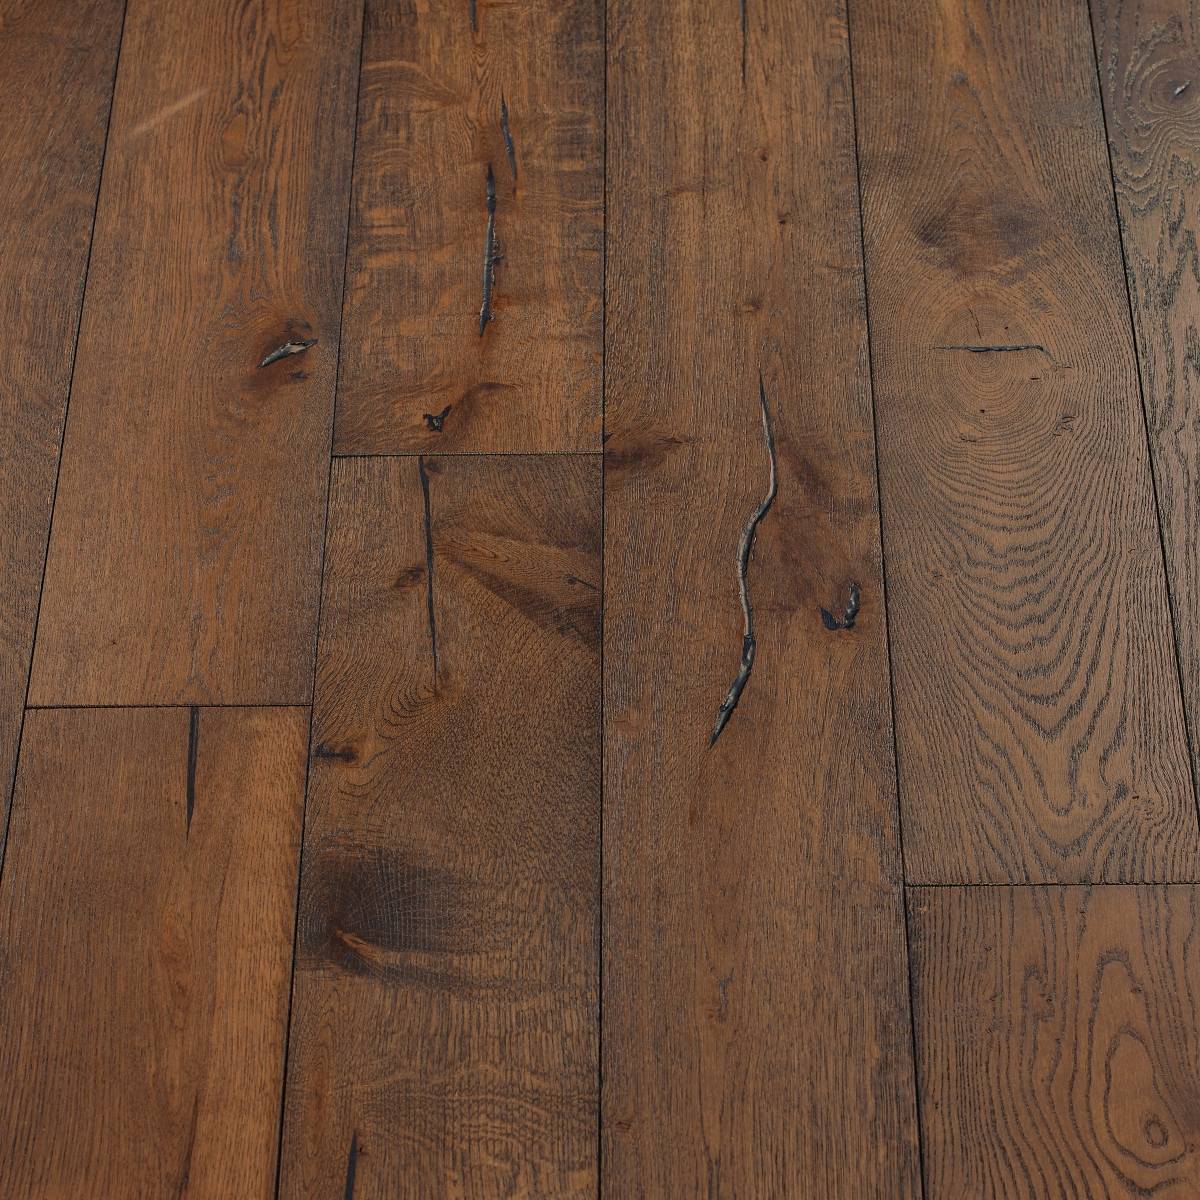 Distressed Coffee Flooring: A view of distressed coffee flooring, displaying a rich brown colour similar to freshly brewed coffee, with distressed details adding warmth and character.